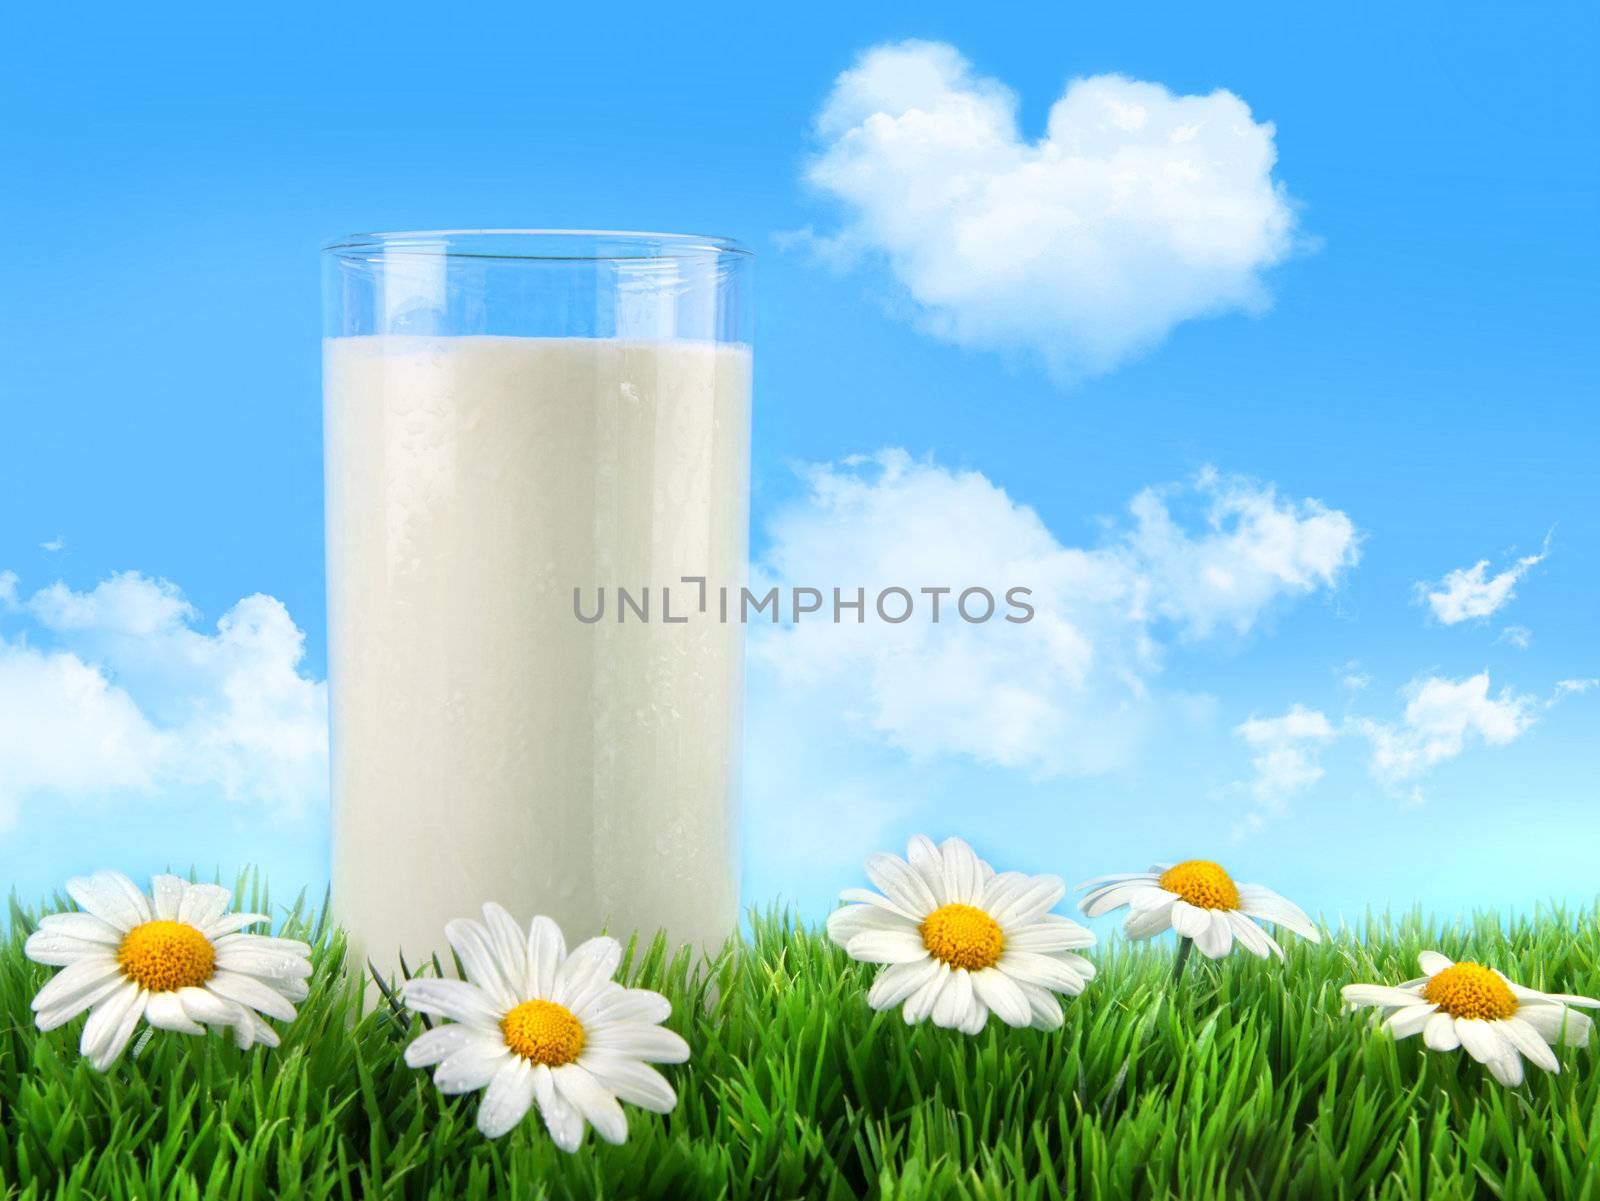 Glass of milk in the grass with daisies by Sandralise